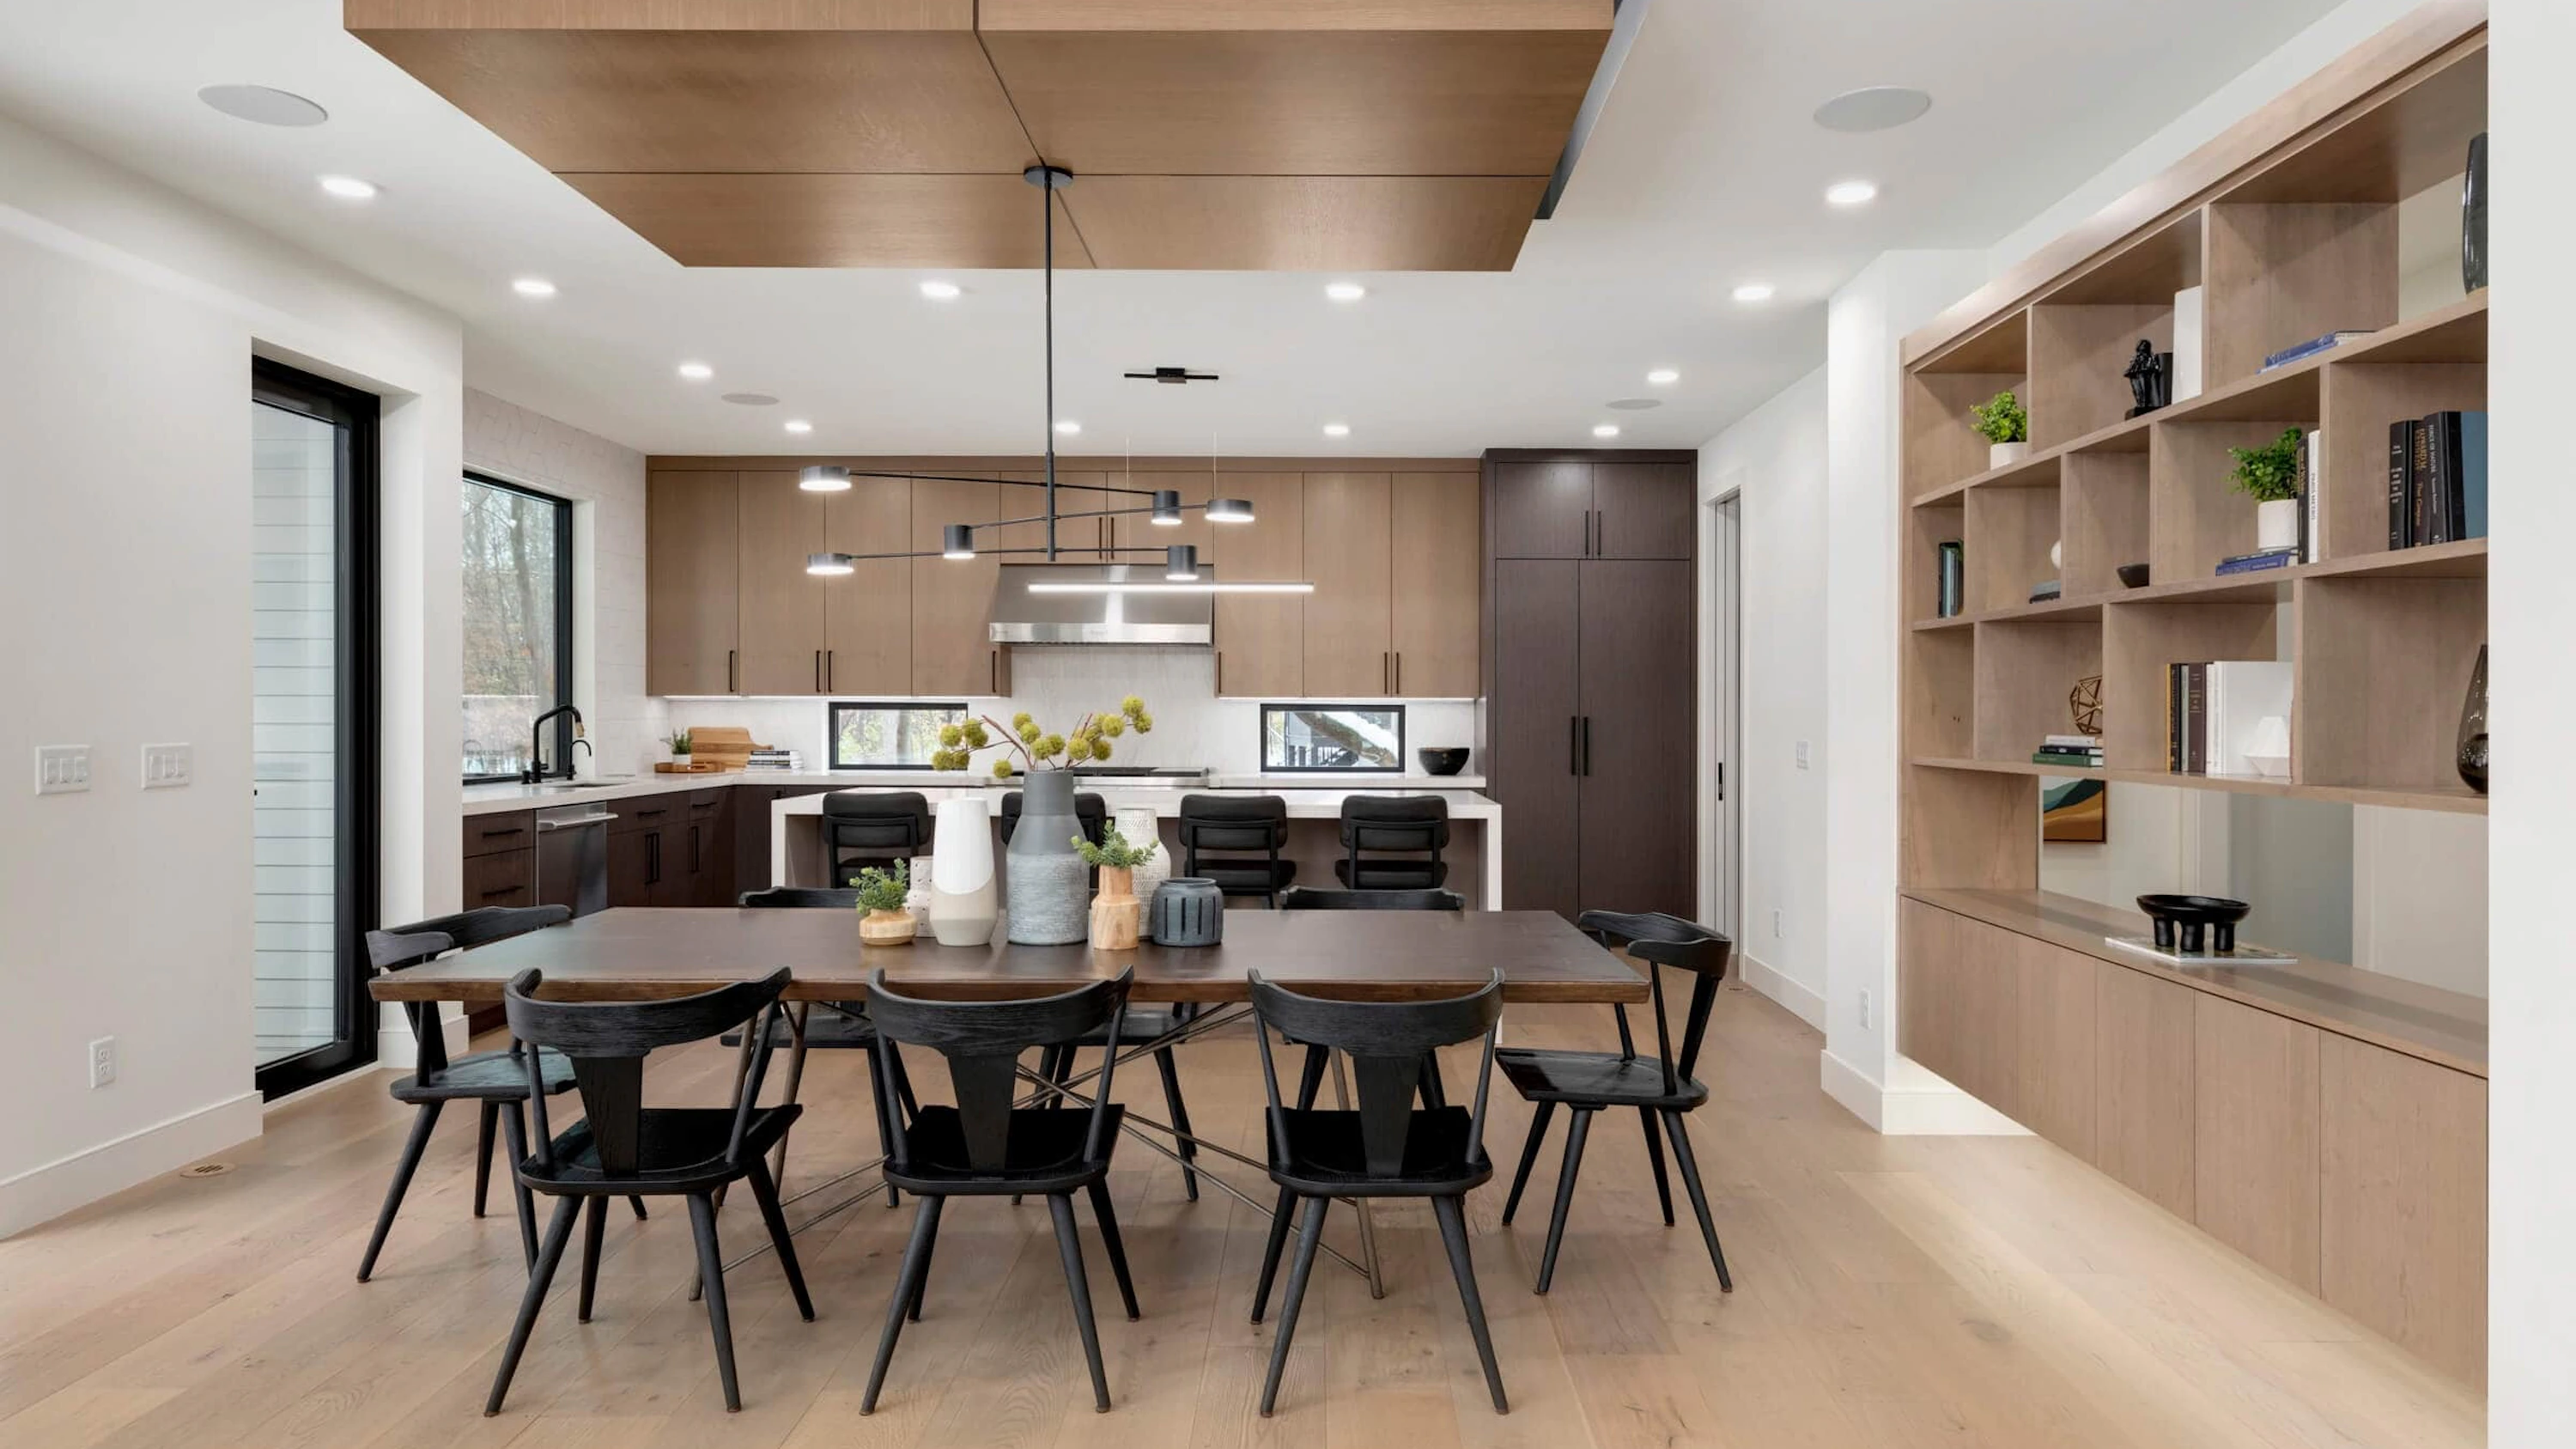 A kitchen with SKS appliances and Cambria countertops